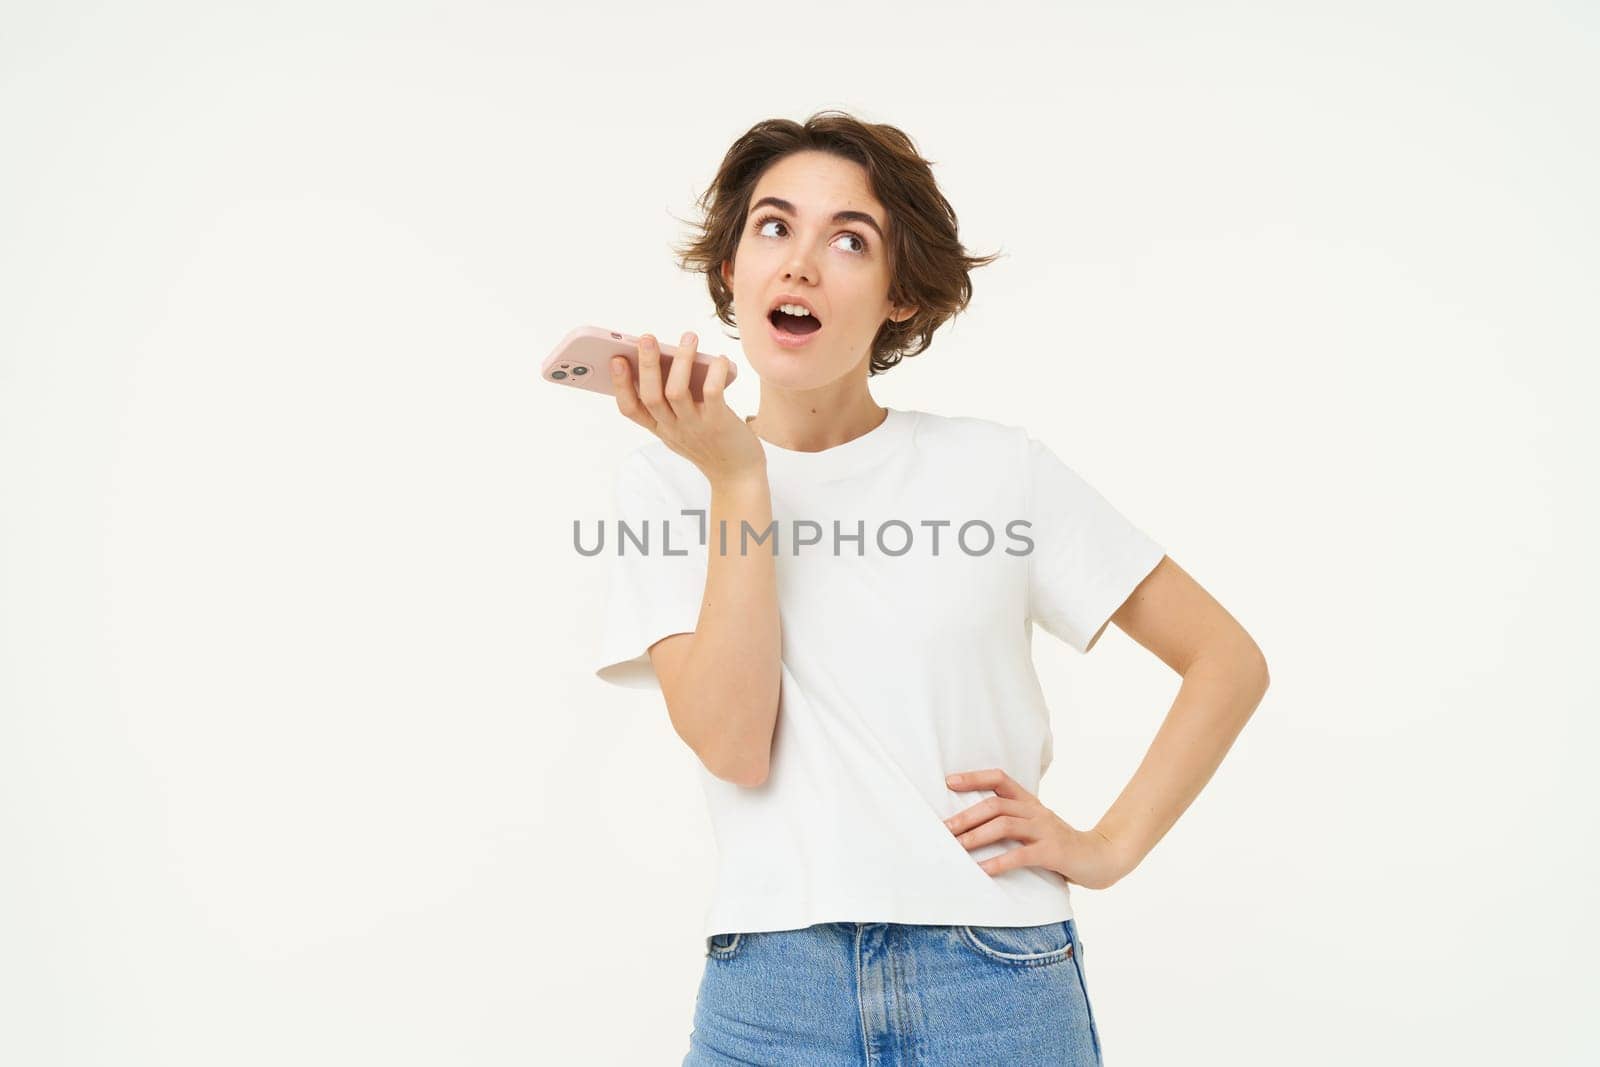 Portrait of woman speaking into speakerphone, taking in microphone, recording voice message, standing over white background.